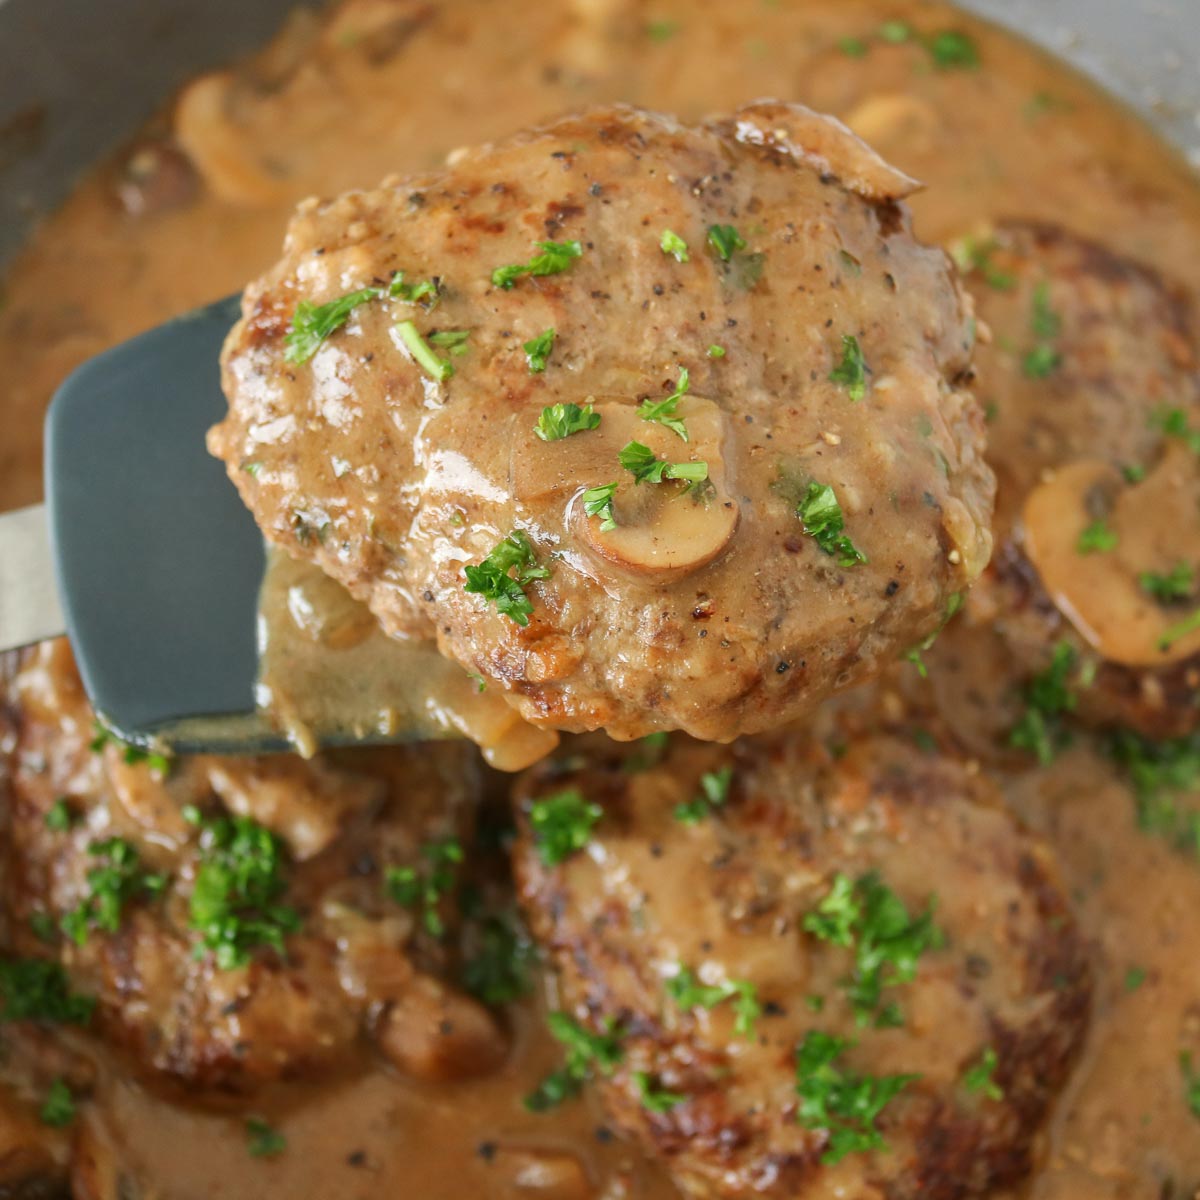 Spatula serving a portion of Salisbury steak from a frying pan.